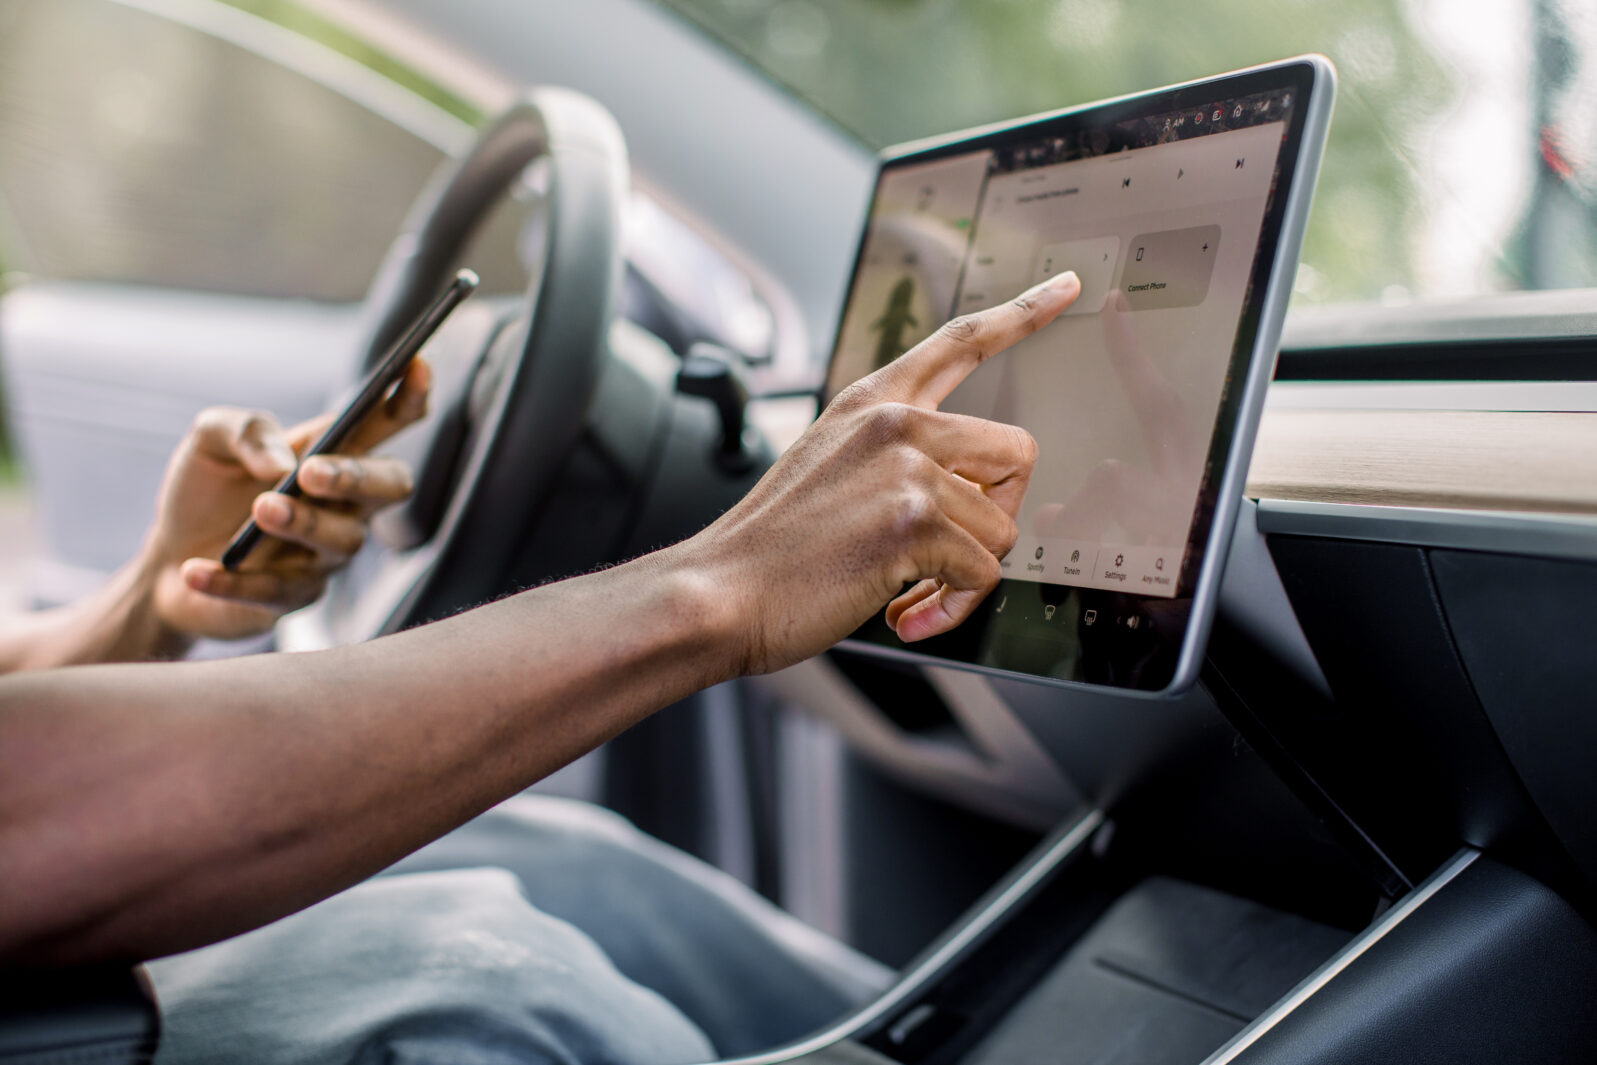 Autopilot self-driving car system with no human intervention. Close up cropped image of hand of African male driver browsing the internet using smartphone and touchscreen in futuristic autonomous car